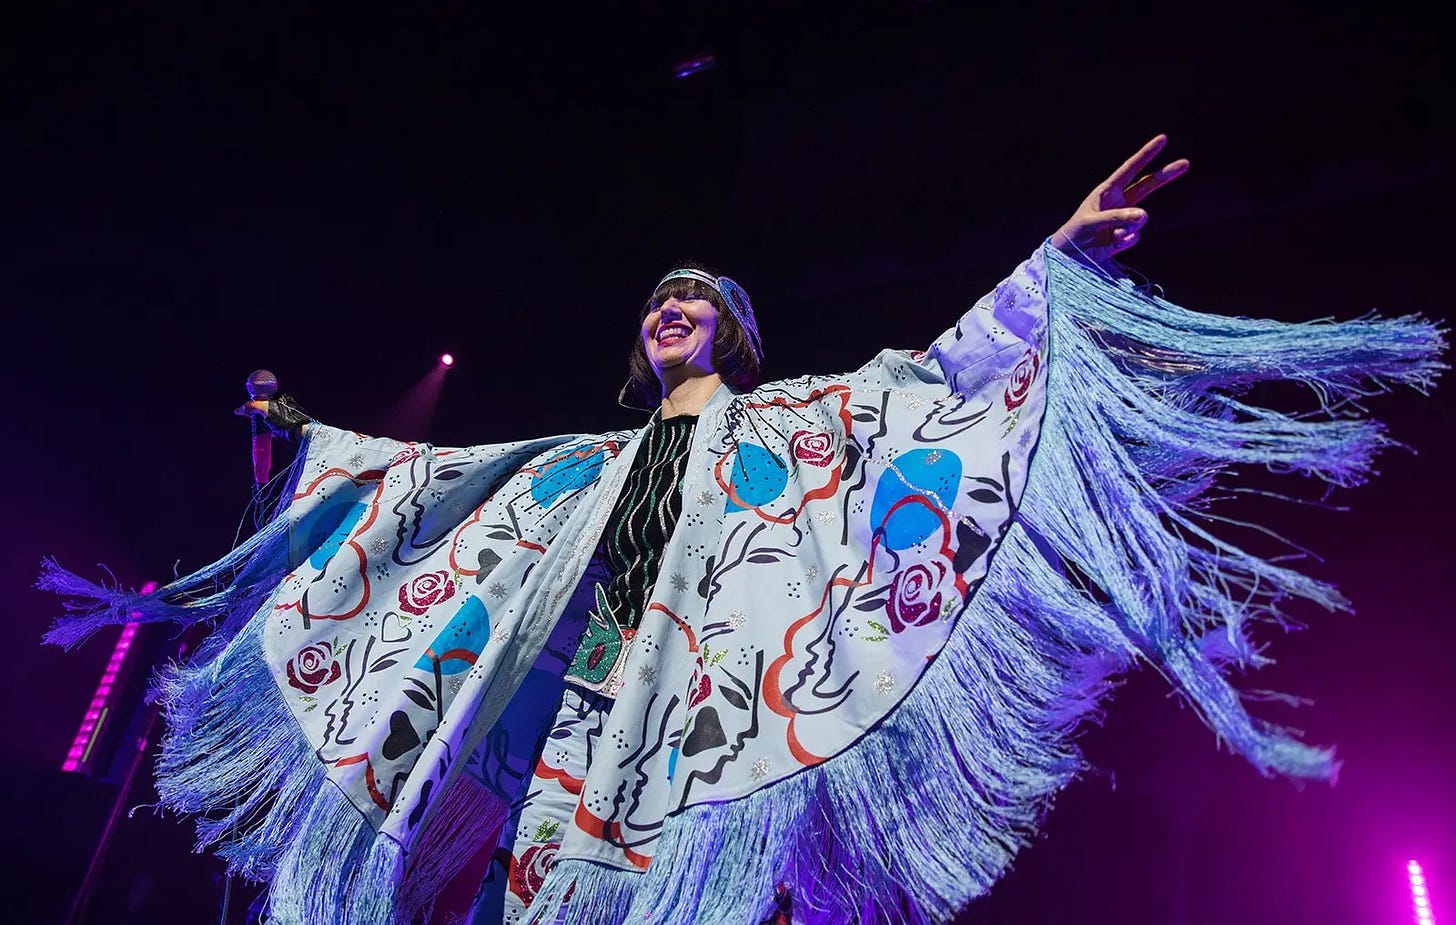 Karen O onstage in a huge abstract cape thing with a ton of fringe. Ethereal.